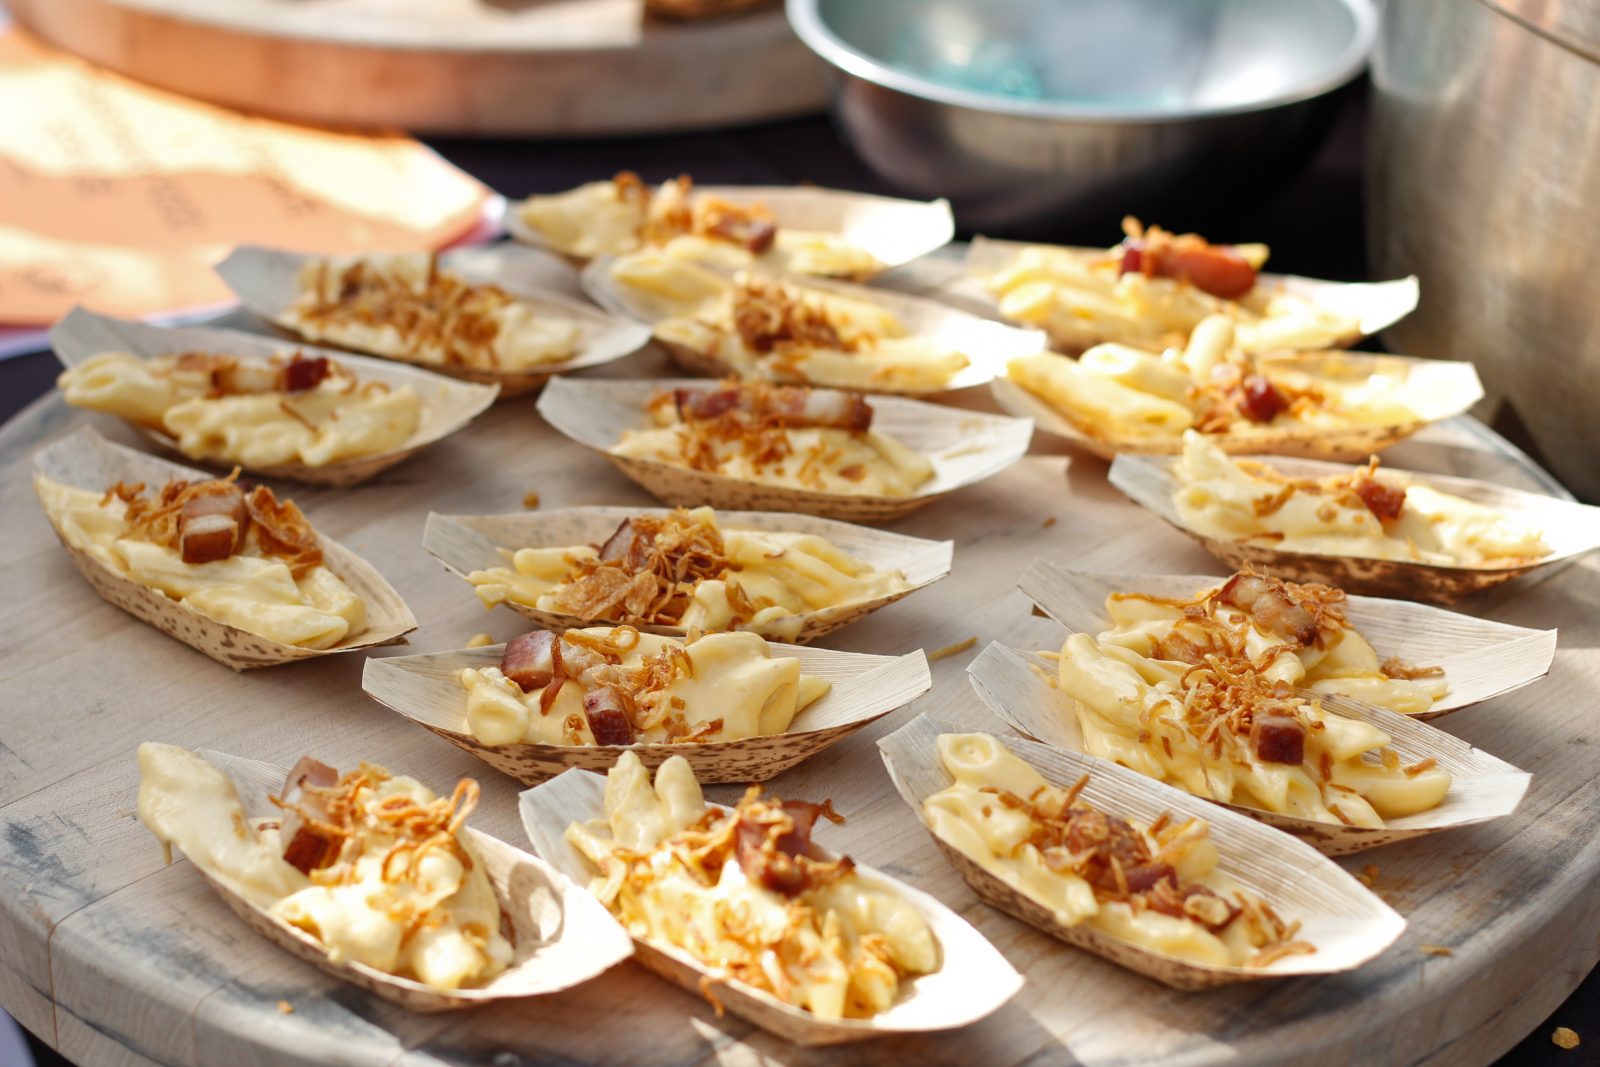 Austin Mac and Cheese Festival – Brittany Ritter